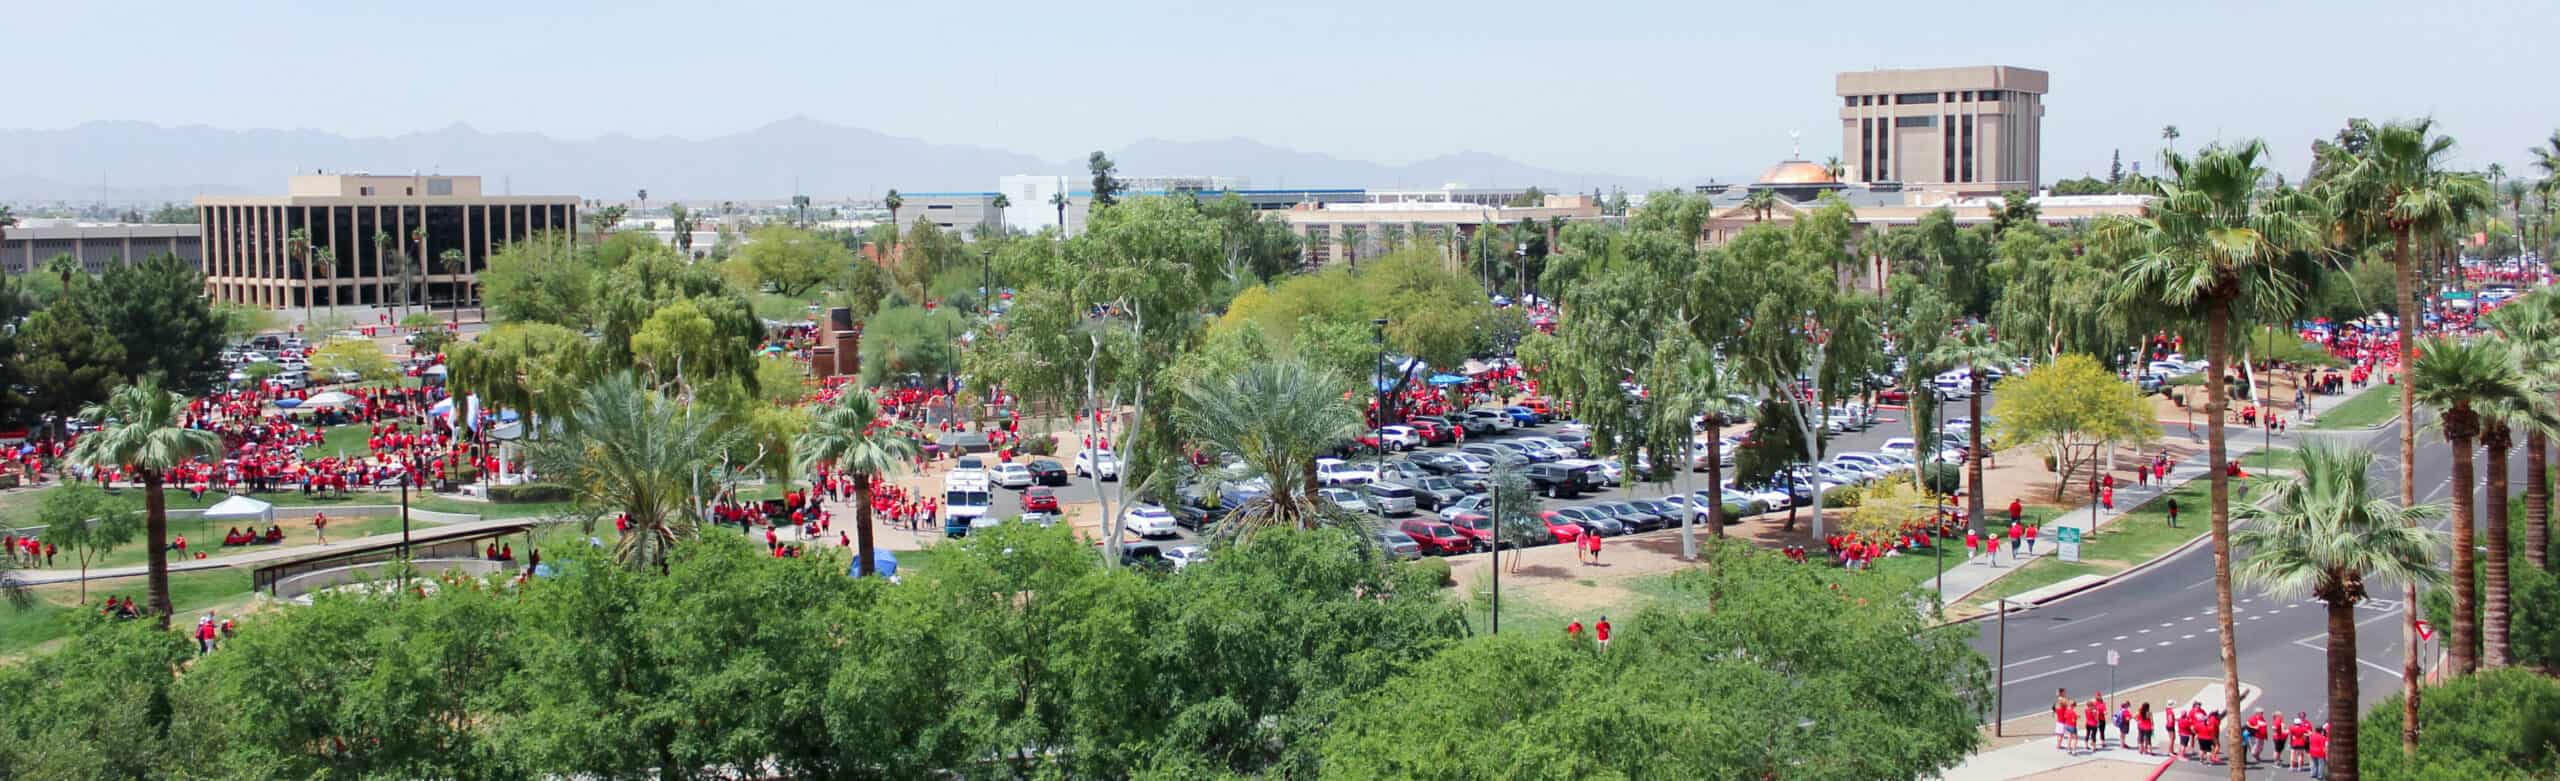 a scene from the 2018 red for ed teacher strike in arizona